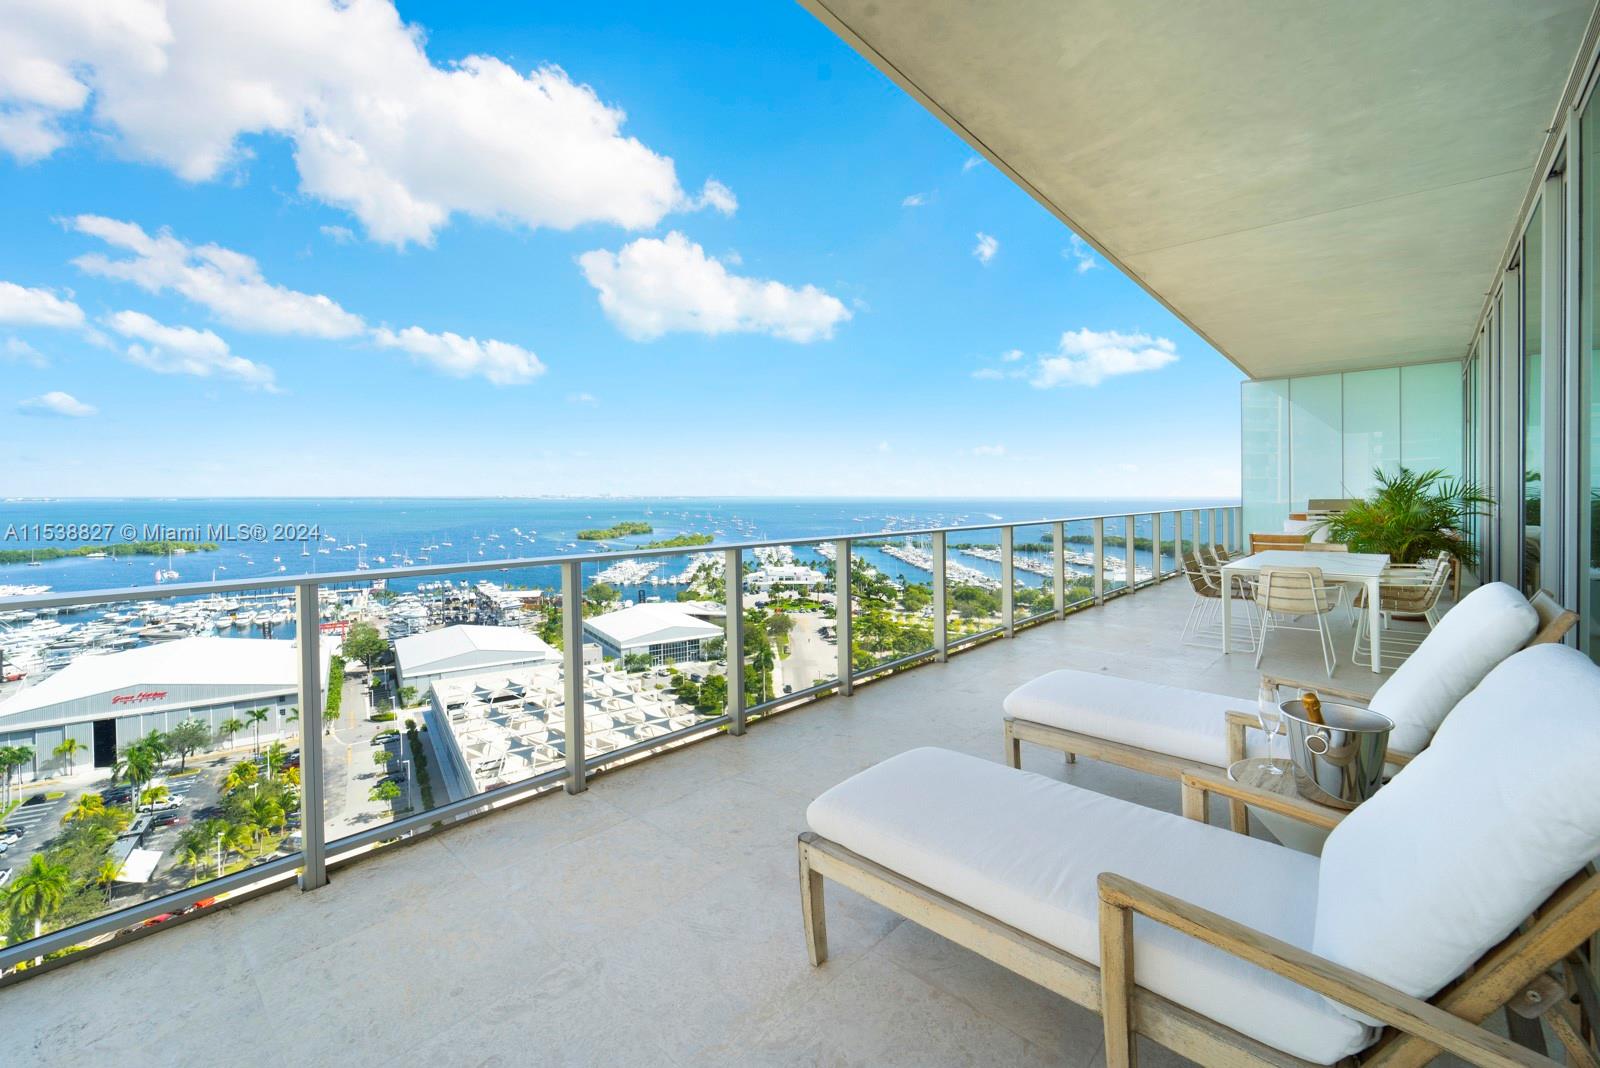 Nestled in the heart of Coconut Grove in the highly-sought after Grove at Grand Bay condominium, this 4-BD, 3.5-BA unit offers endless water views and a unique living experience for the most discerning buyers. Encompassing 4,933 SF with 12-ft floor-to-ceiling impact windows, the unit occupies a coveted spot in the South Tower's NE corner, with sweeping panoramic views of Biscayne Bay and the city. An impressive gourmet kitchen boasts an expansive center island, premium appliances, a gas cooktop, and ample counter space. The unit showcases high-end materials and finishes, exhibiting a sophisticated and refined ambiance. The open floor plan is ideal for displaying art collections and hosting guests. Incredible opportunity to own in one of the most prestigious buildings in Coconut Grove.